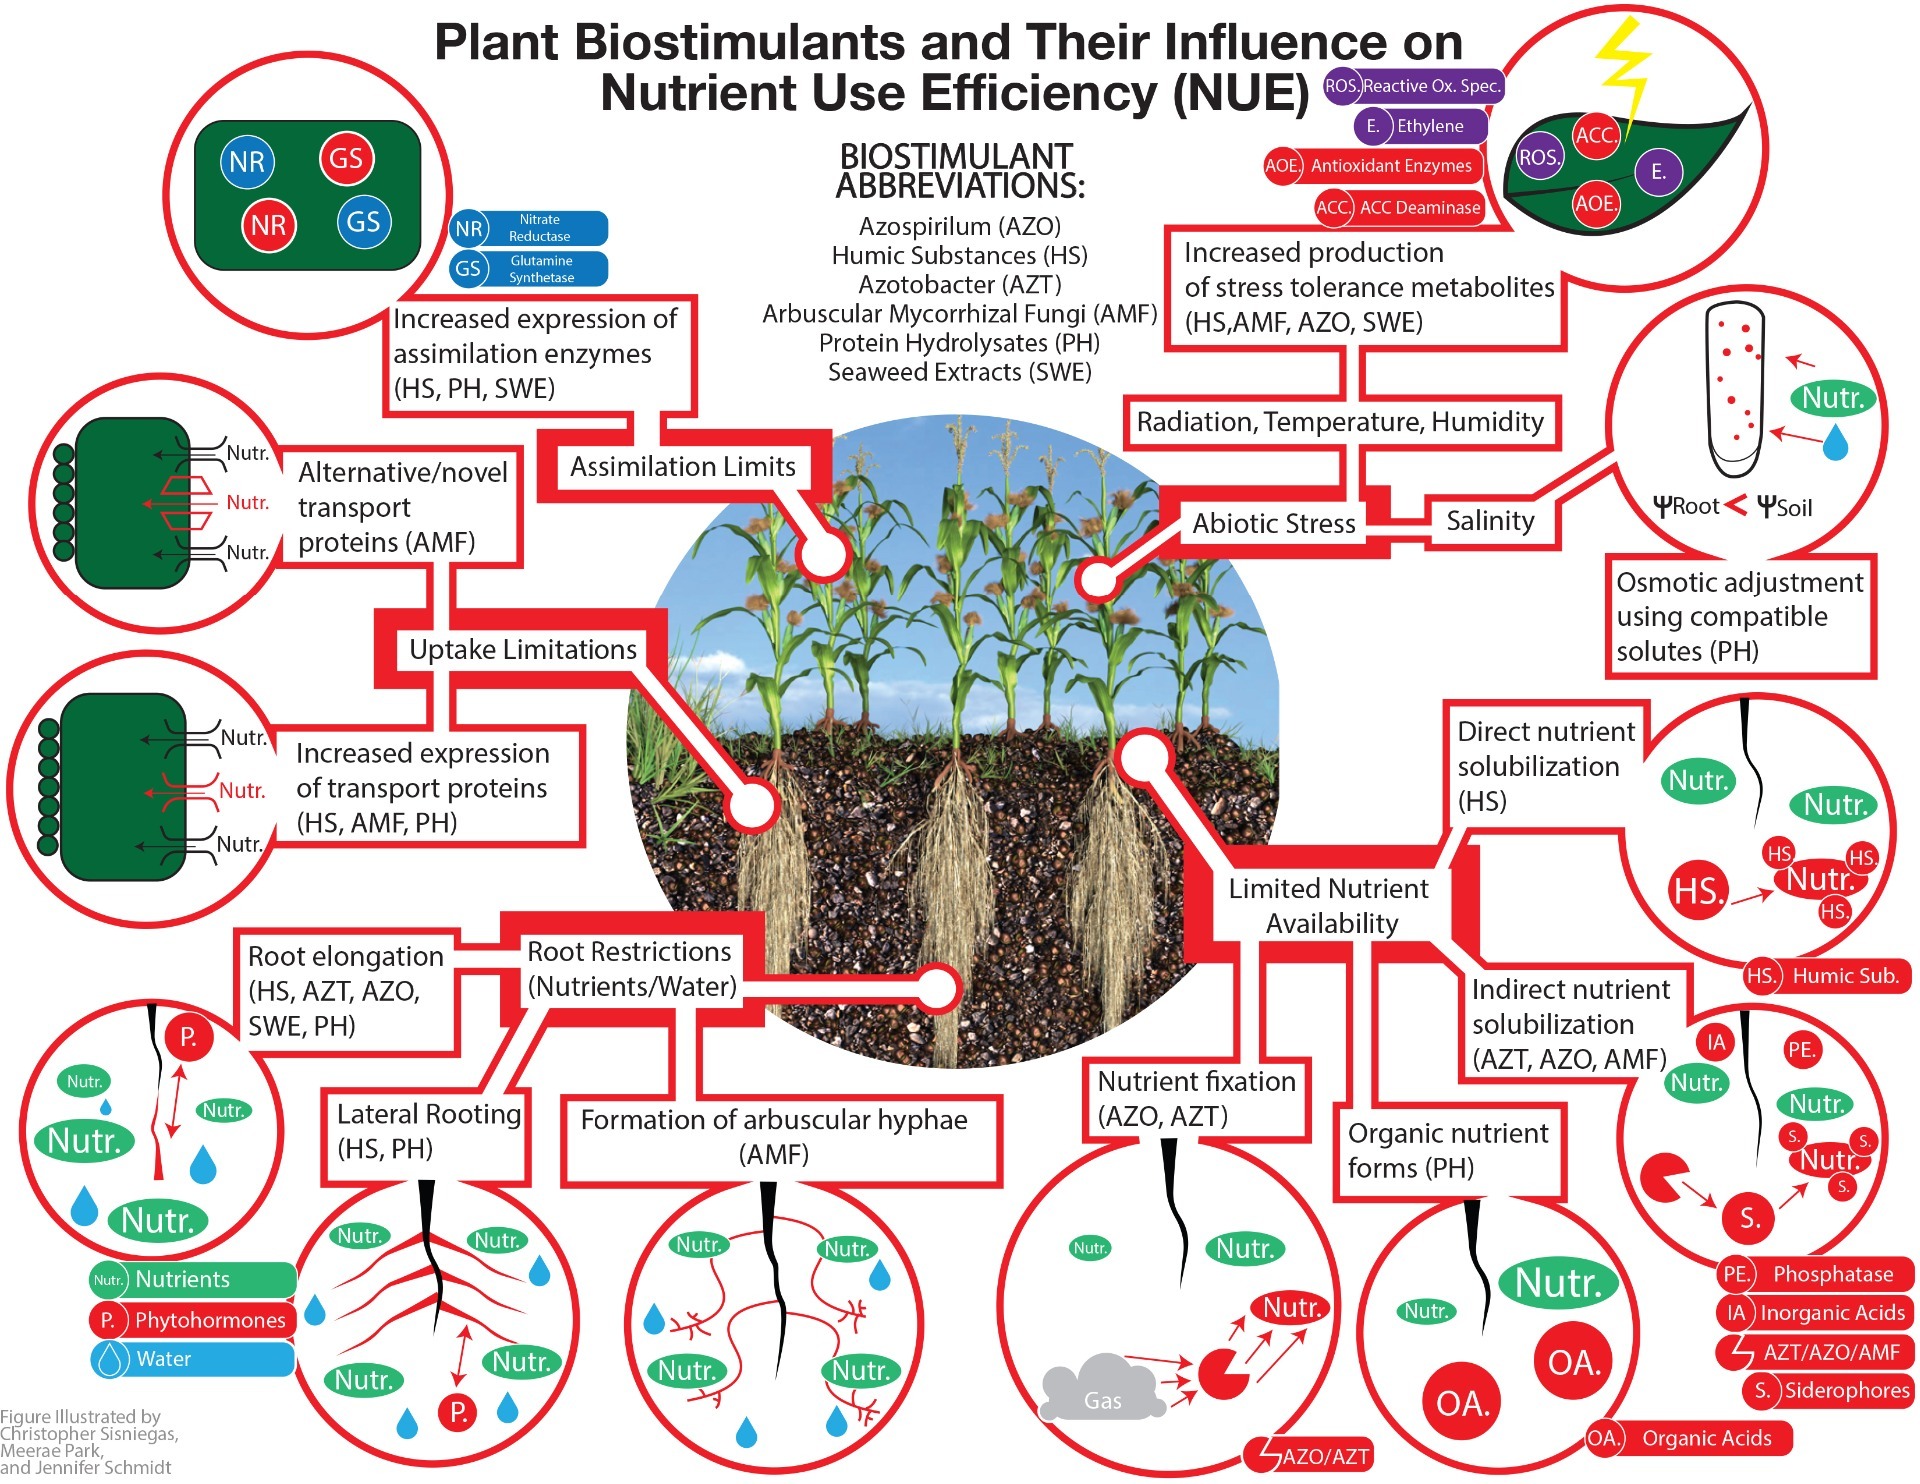 Plant biostimulants and their influence on NUE